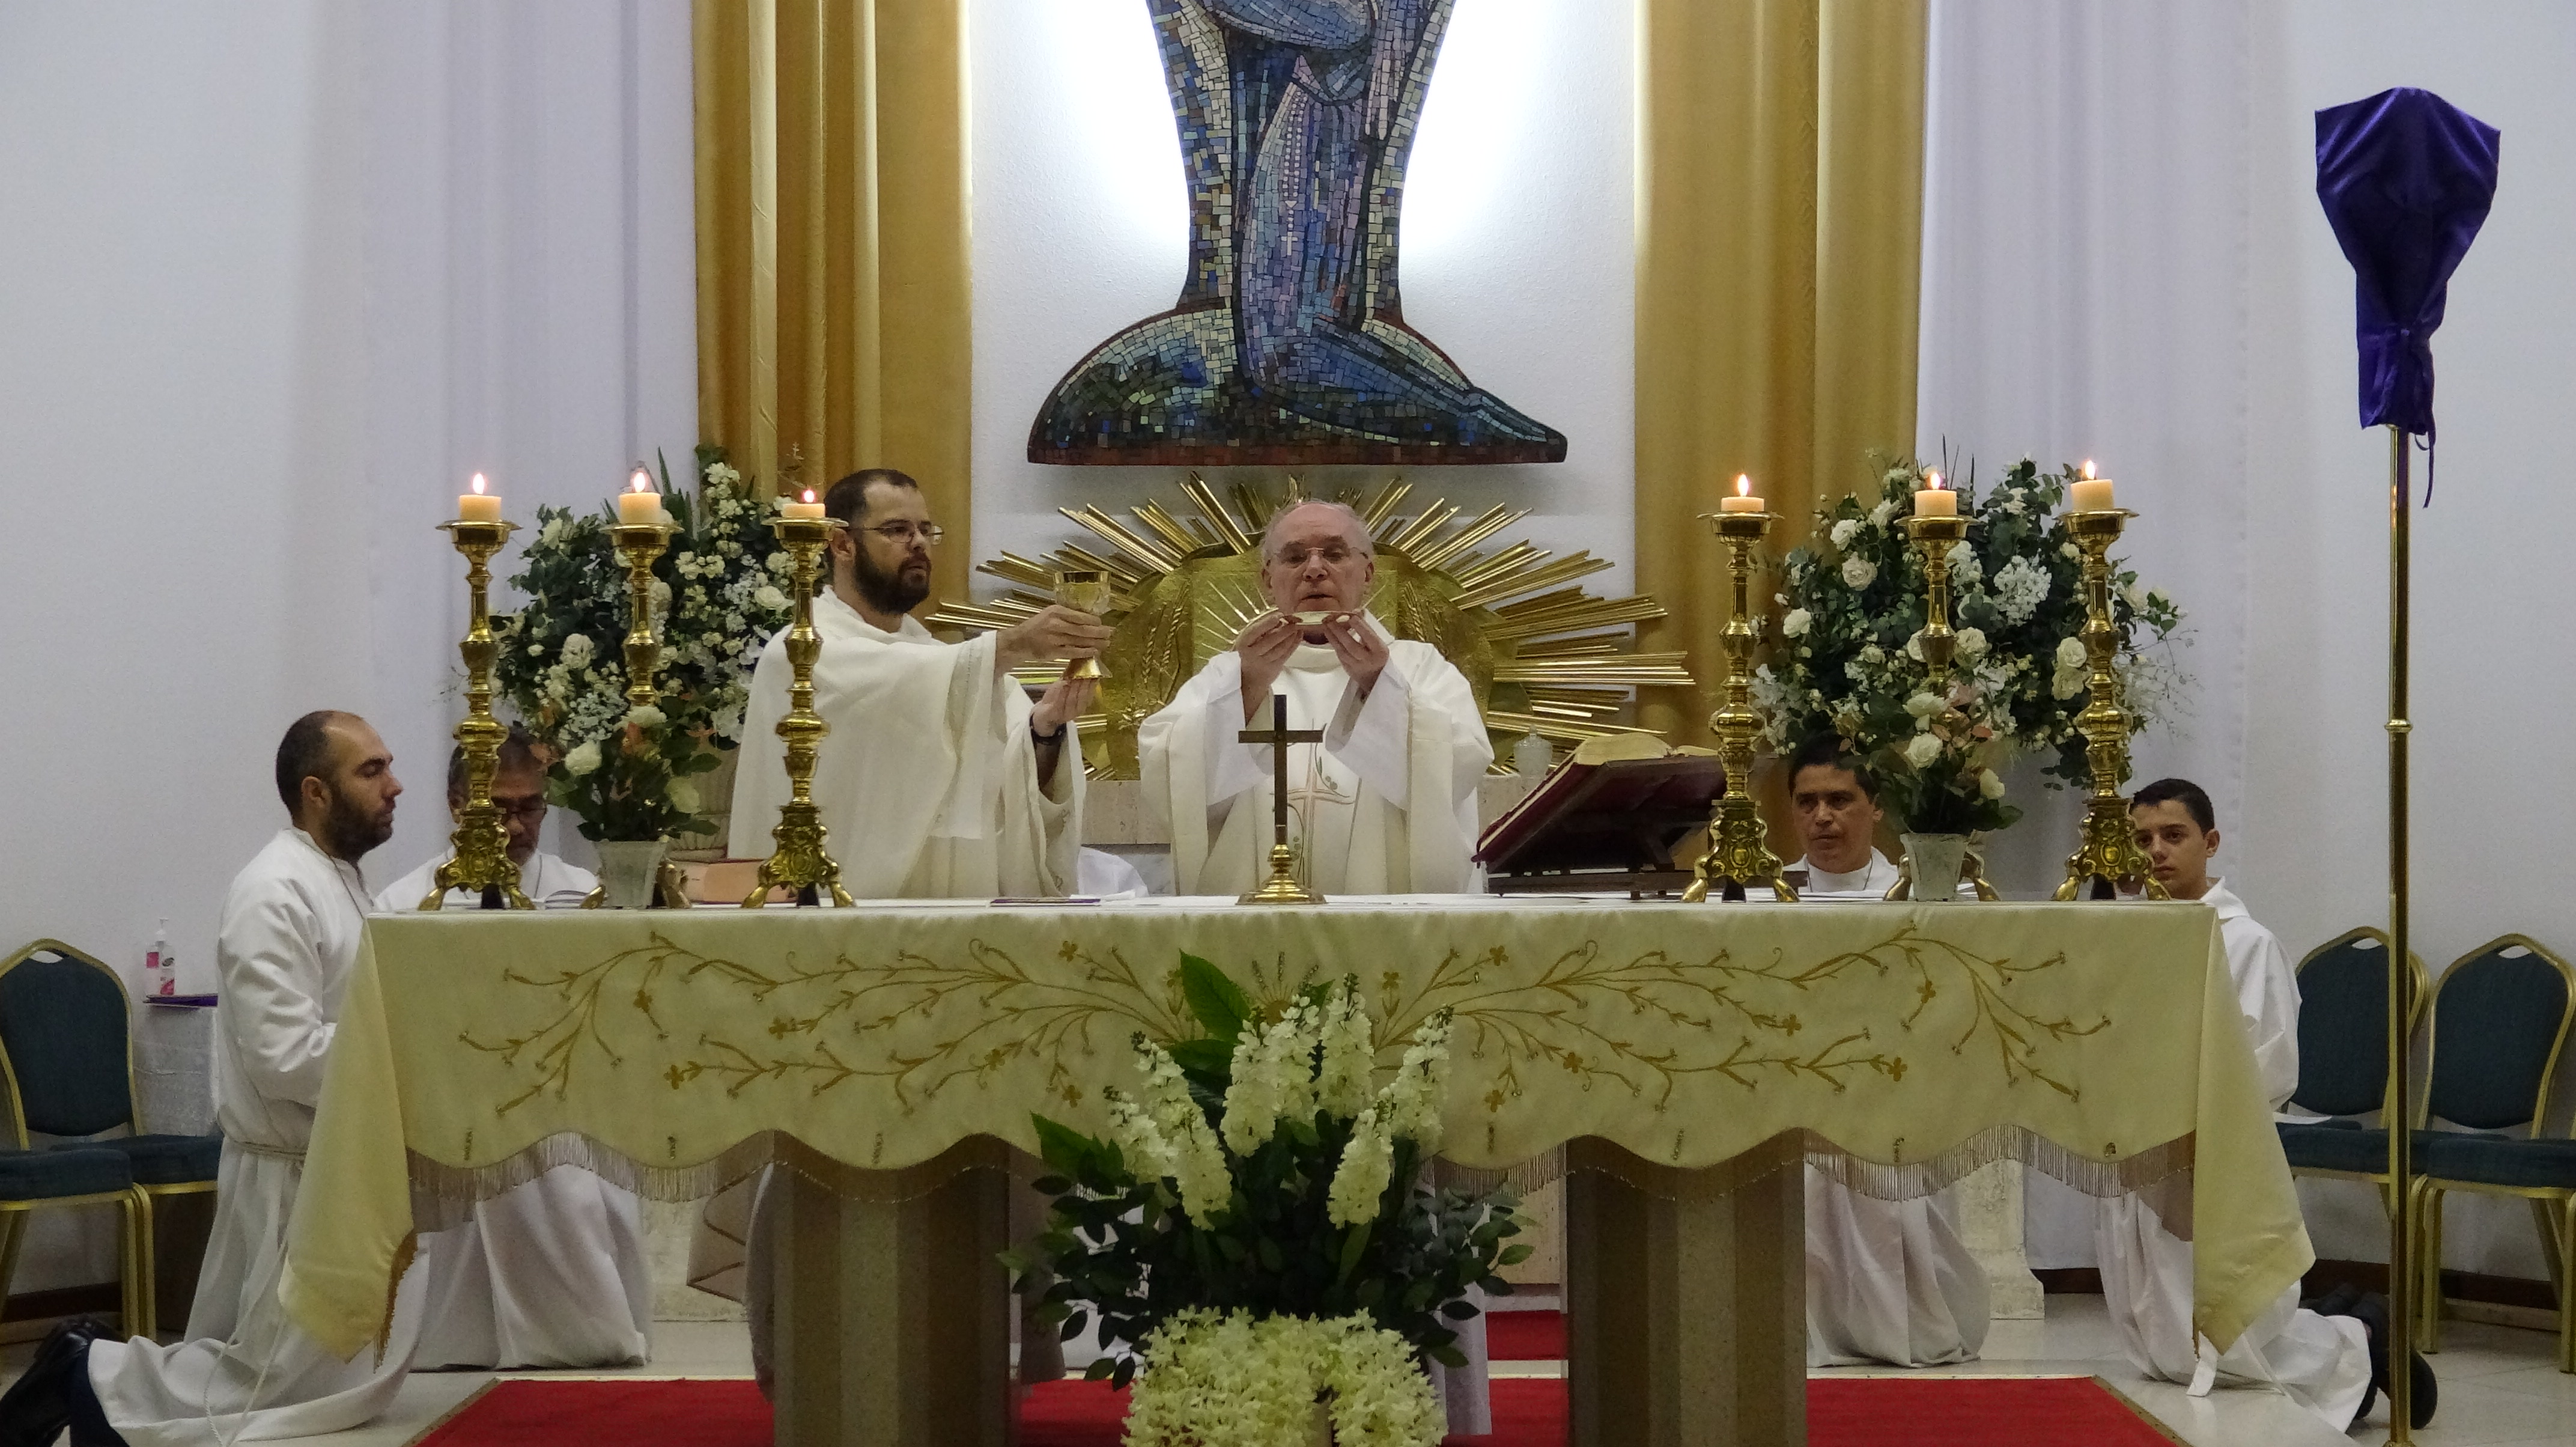 Mass and how to get to one now